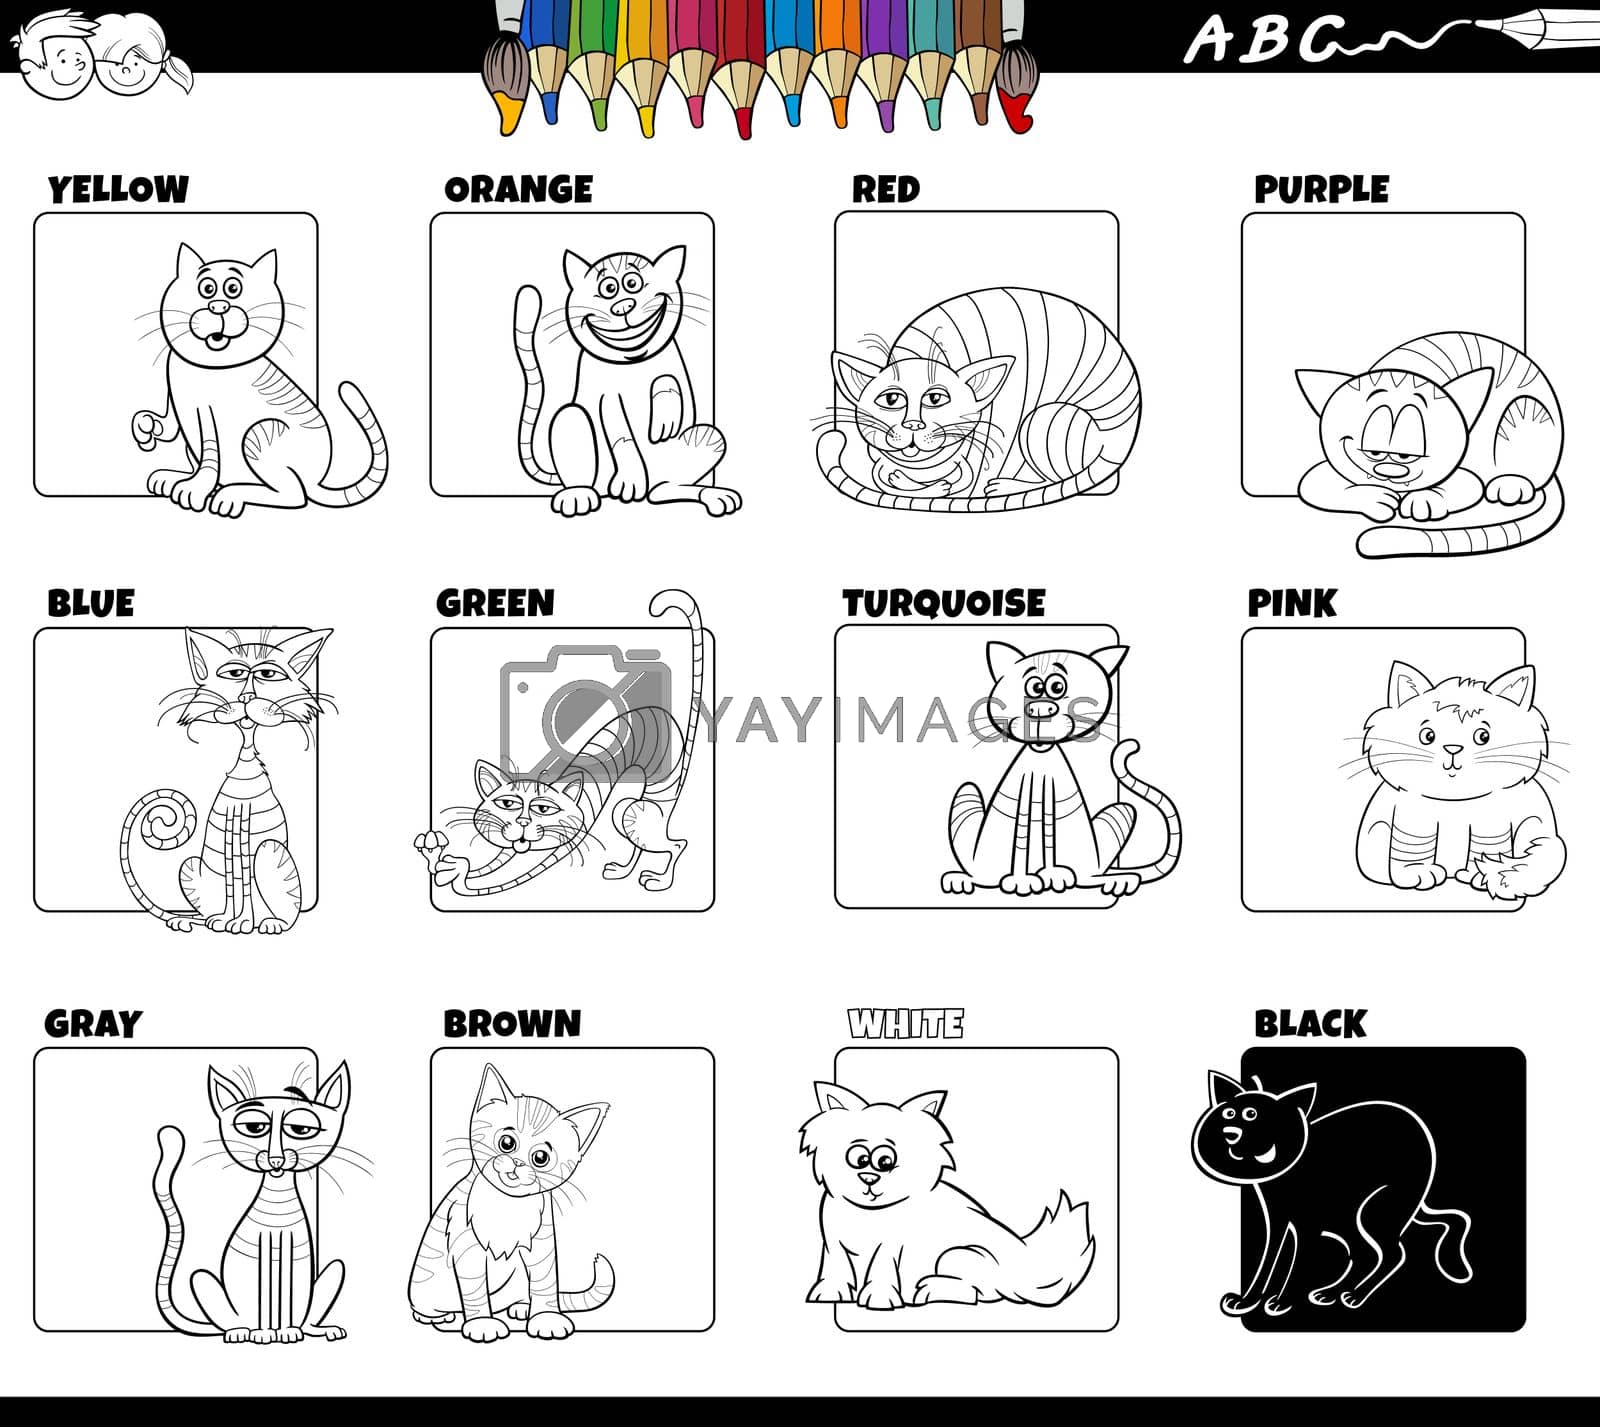 Royalty free image of basic colors with cats characters set coloring page by izakowski